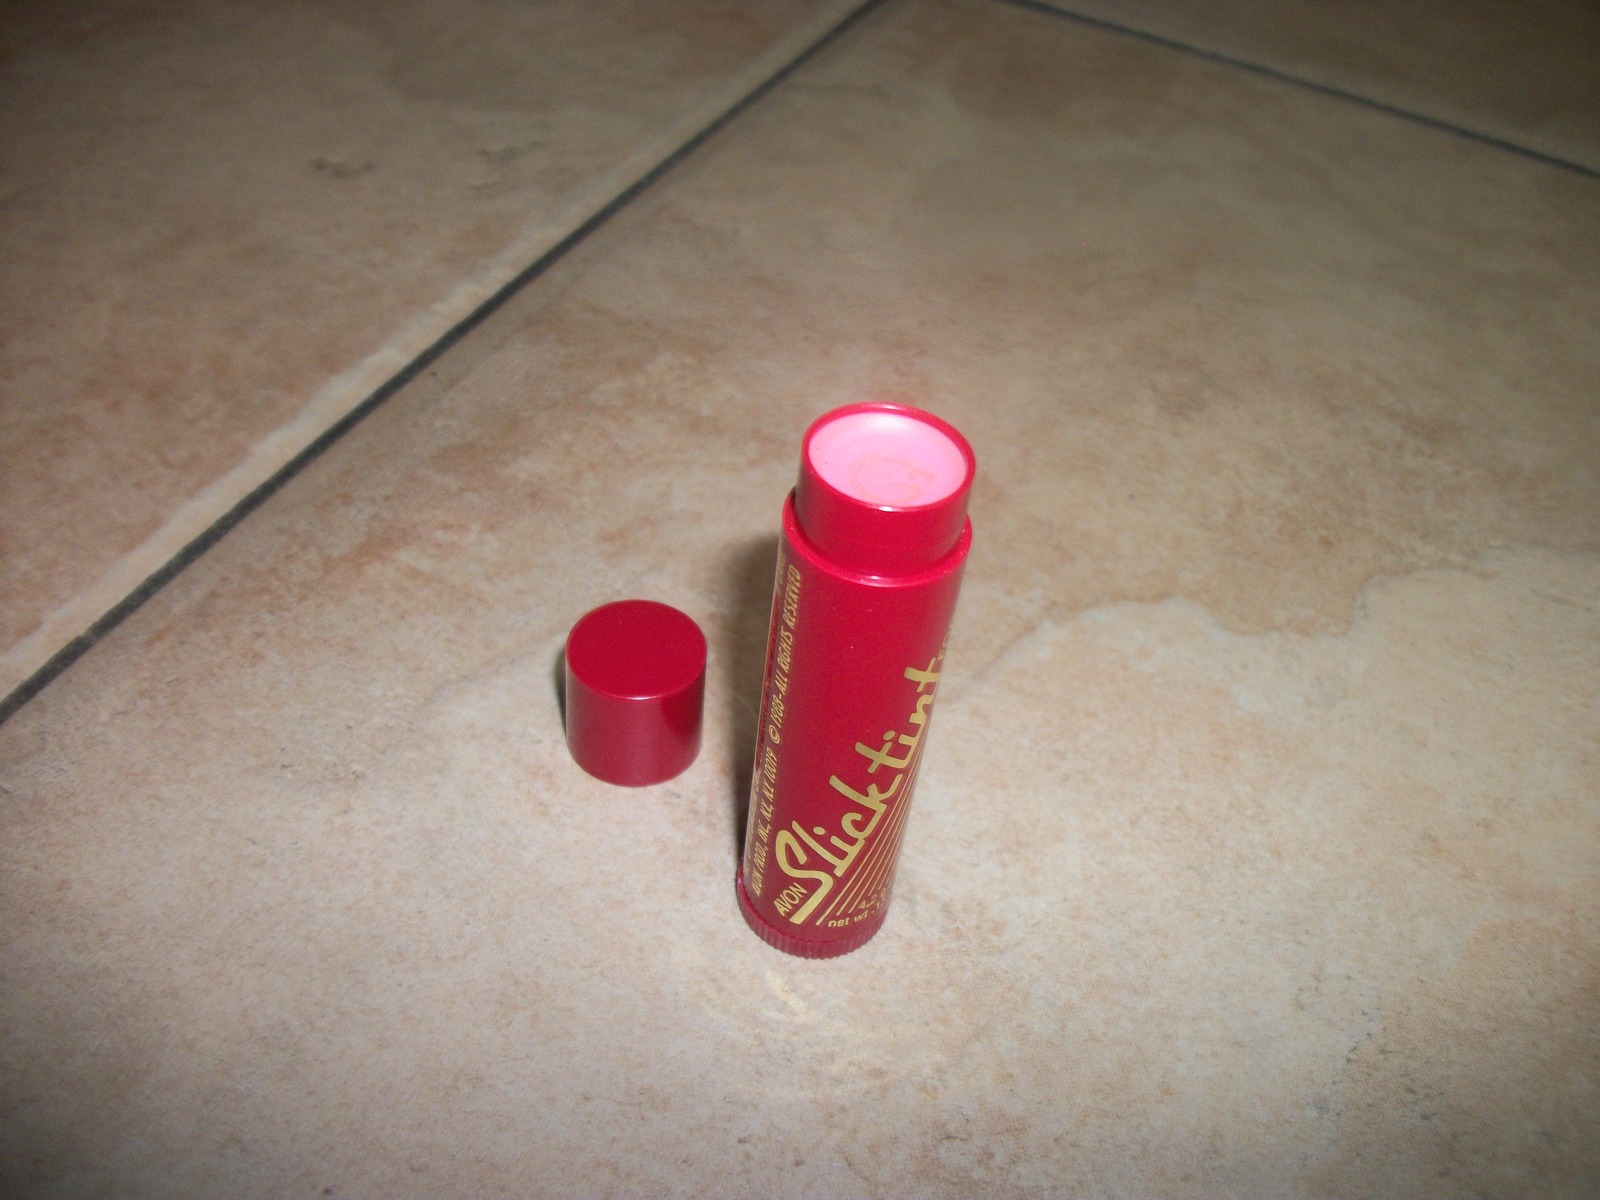 retractable lip stick/stain by Avon brand new Glossy rose - $5.00